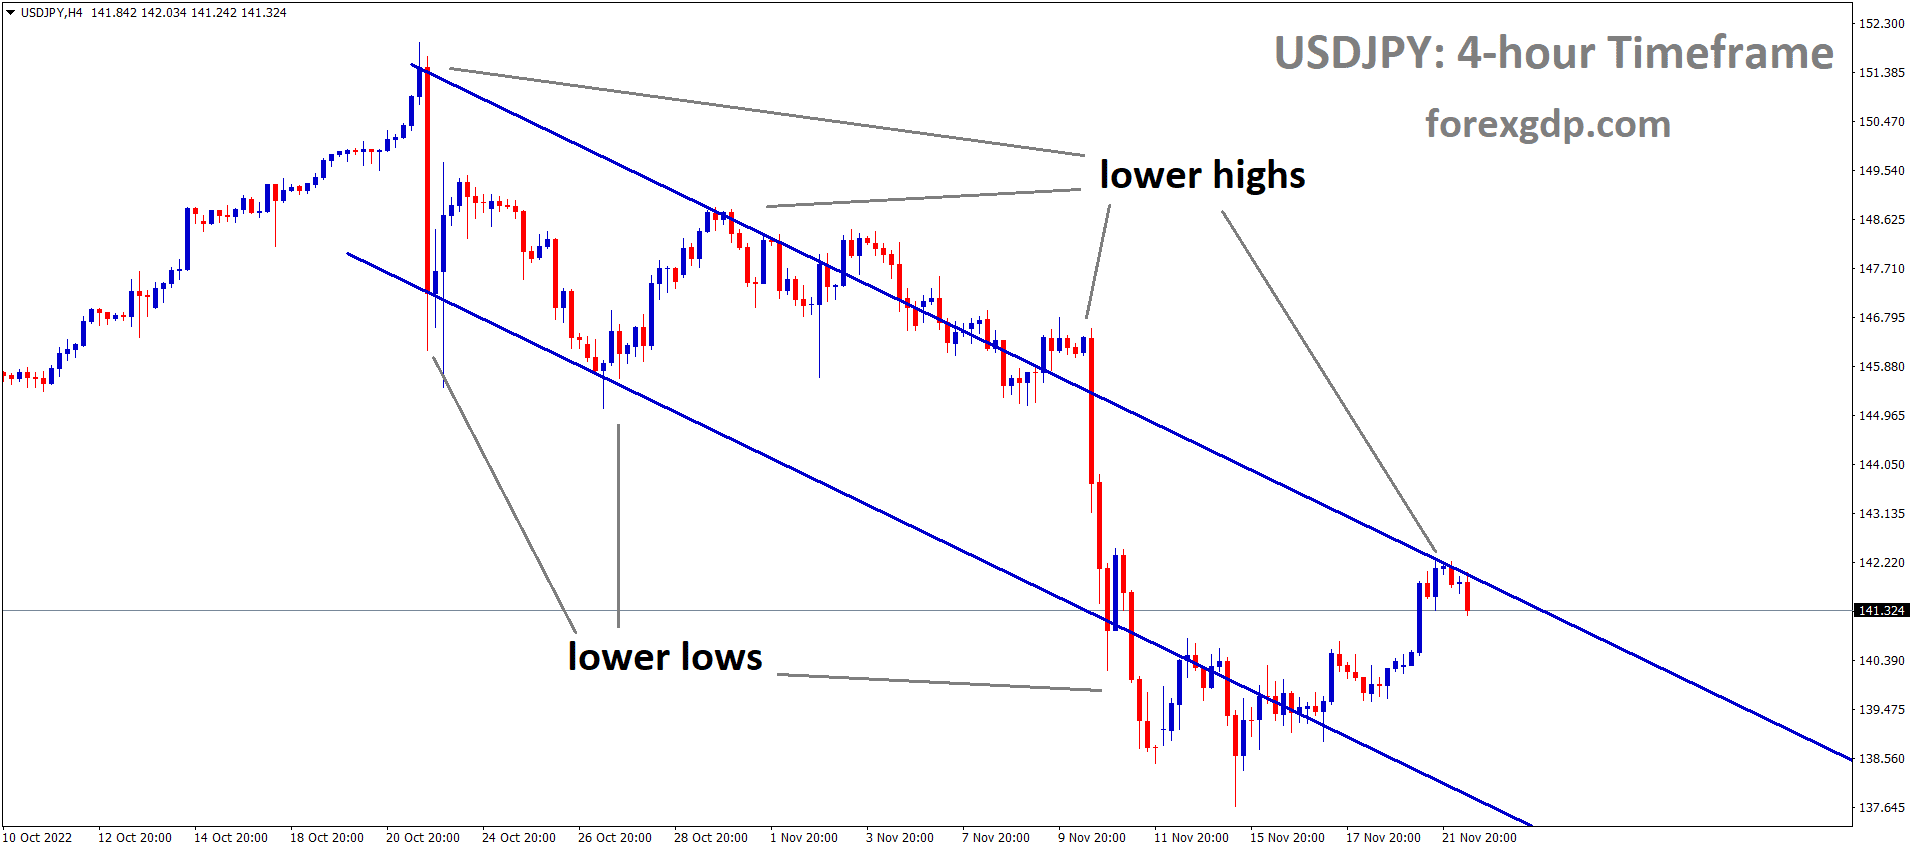 USDJPY is moving in the Descending channel and the market has fallen from the lower high area of the channel.